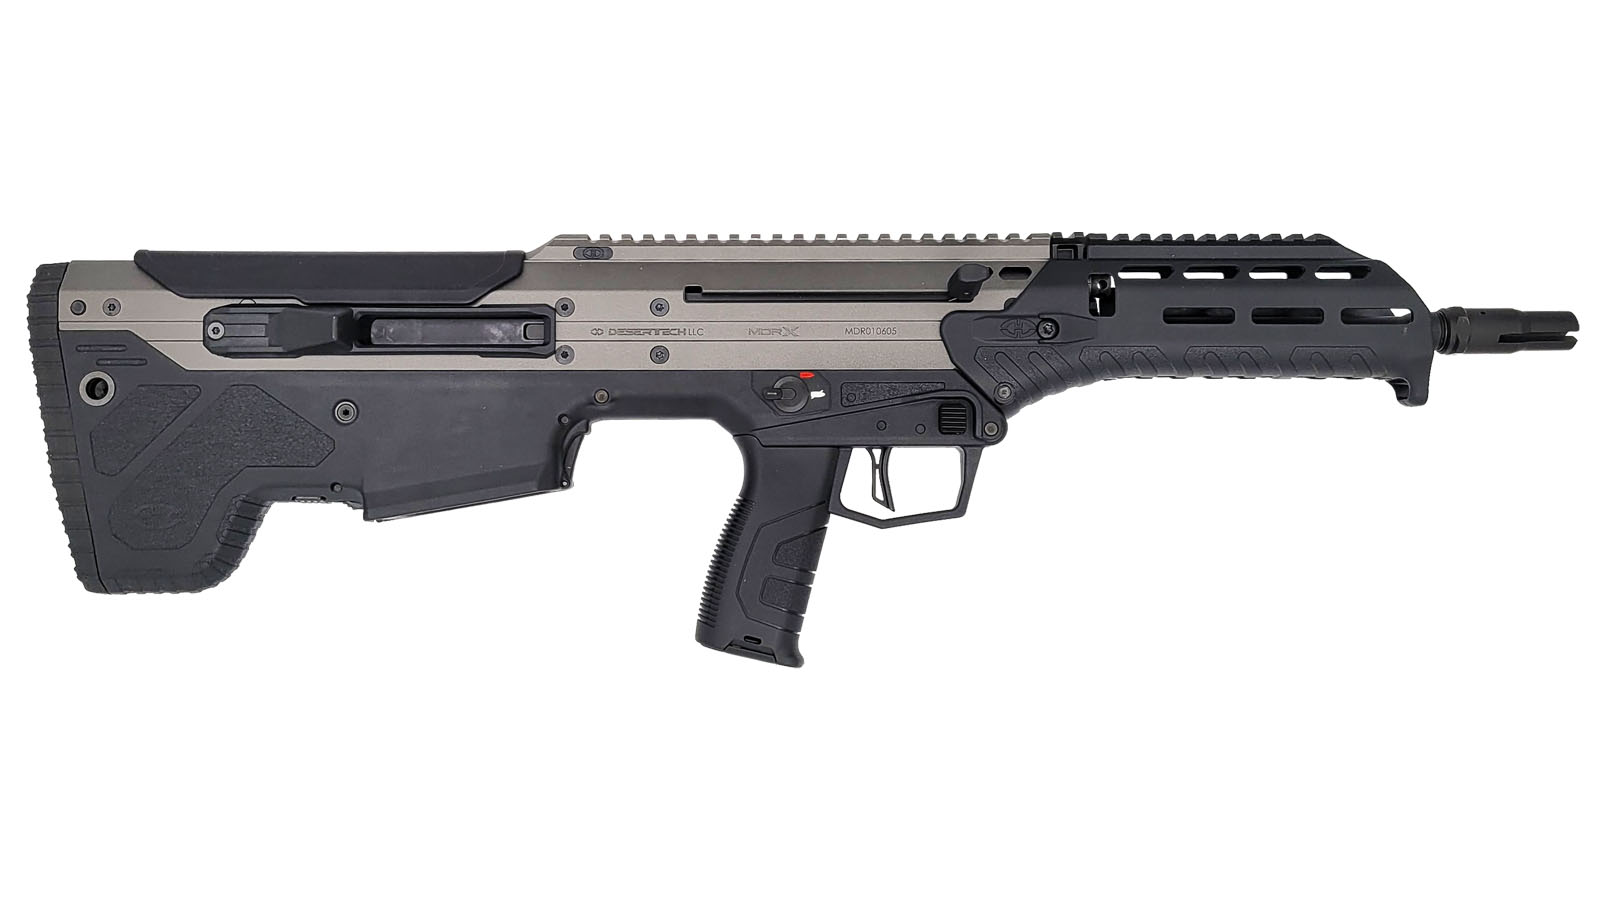 MDRx Rifle, 556NATO 223Rem 16" 30rd Side-Ejection Tungsten